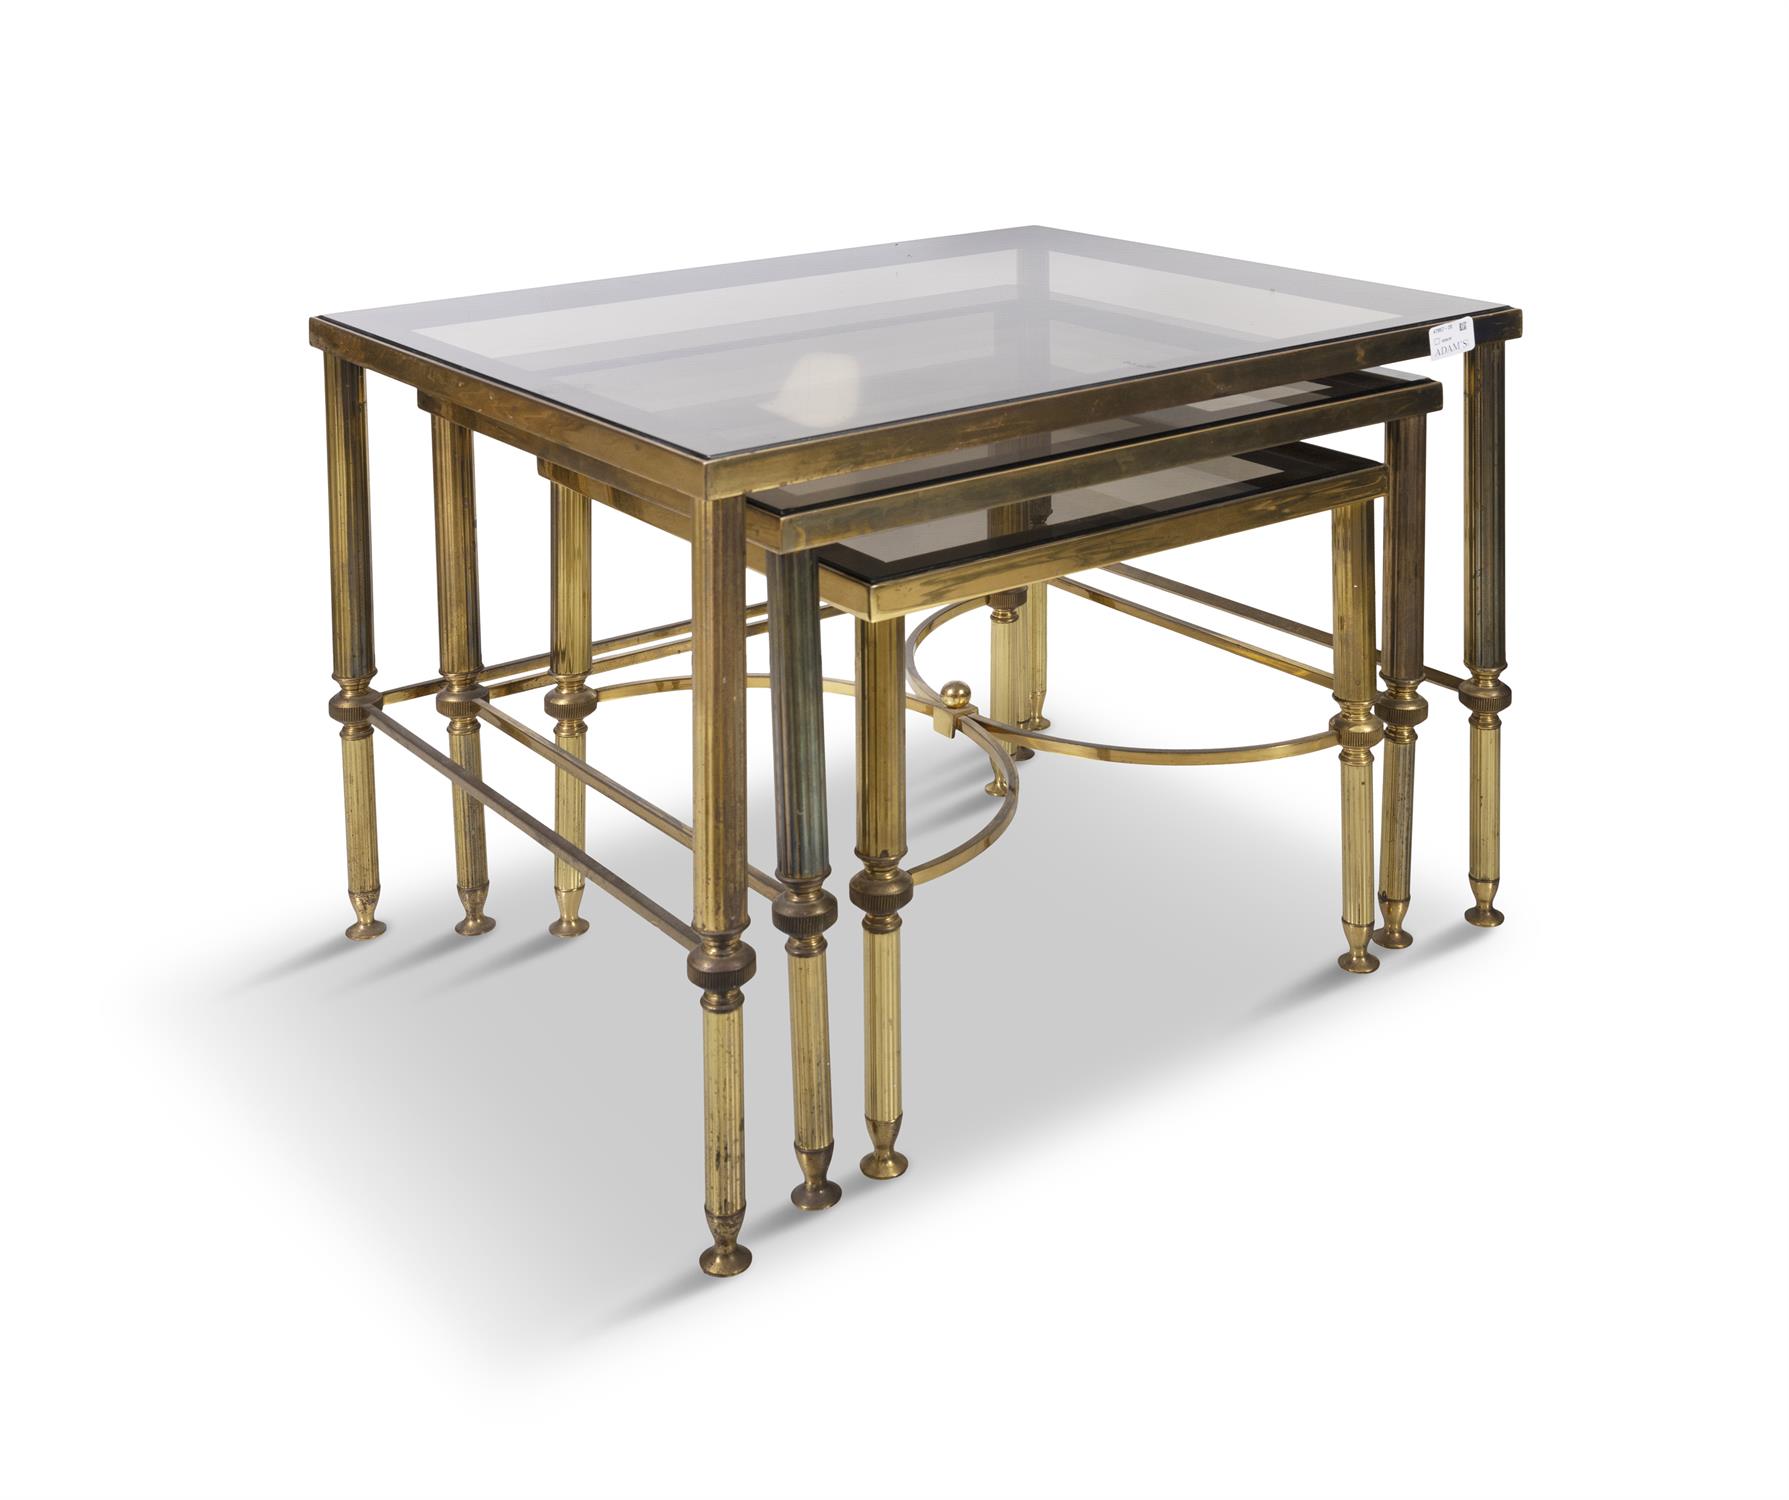 SIDE TABLES Trio nest of brass side tables with smoked glass tops. Italy, c.1970. 56.5 x 46. - Image 2 of 4